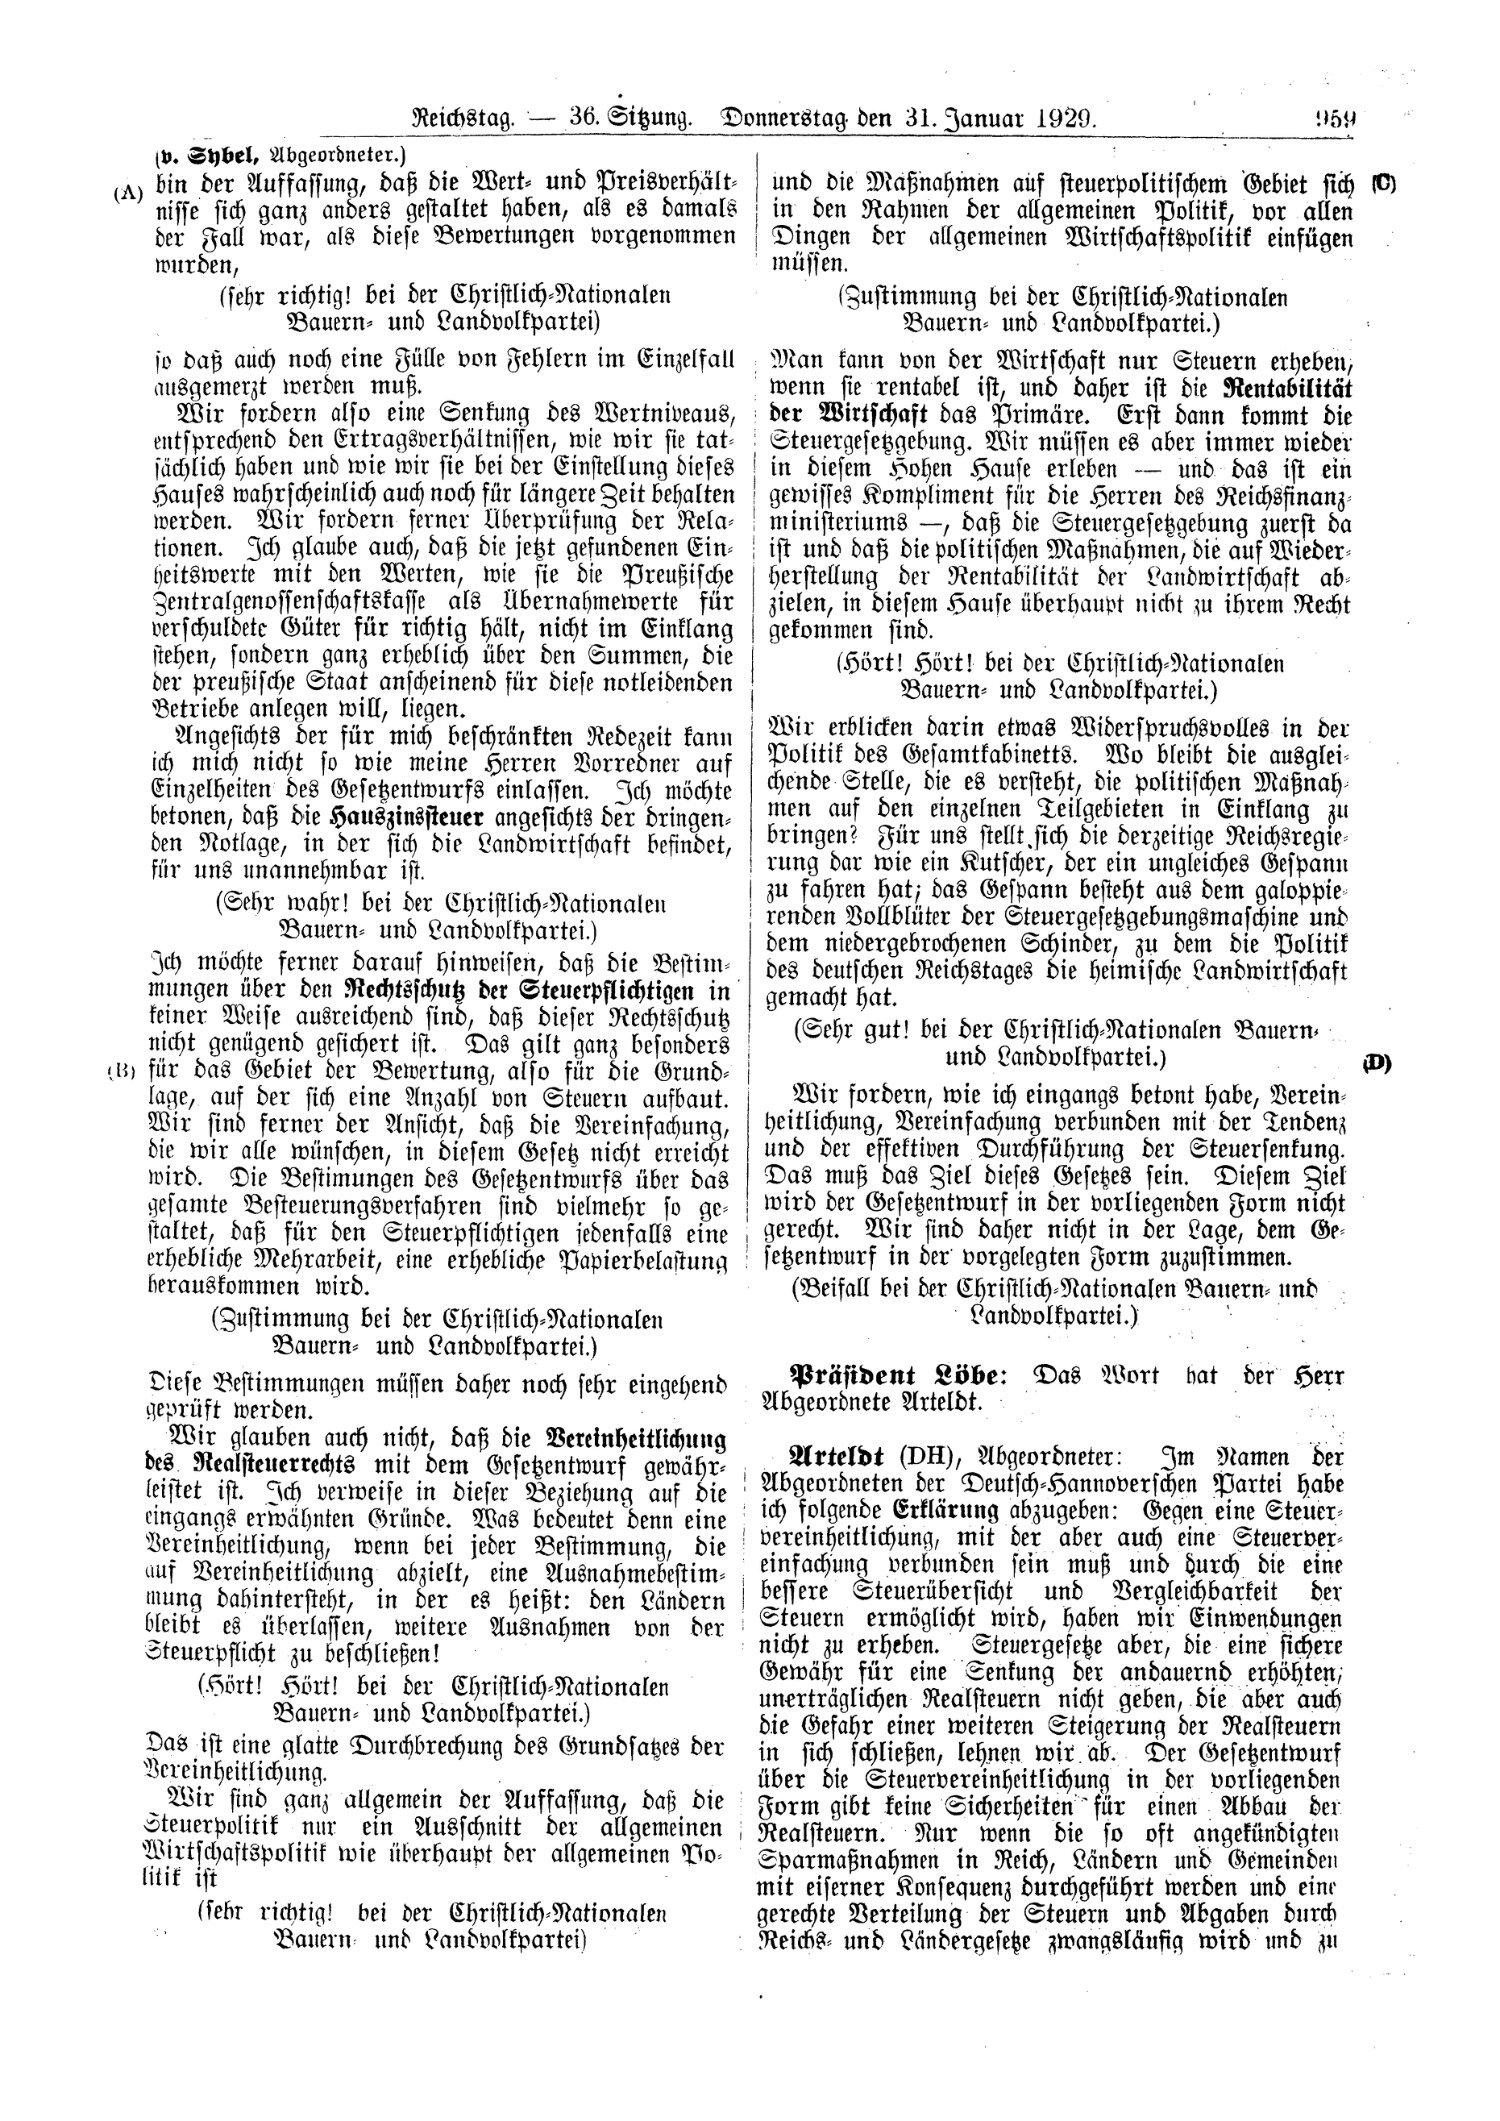 Scan of page 959